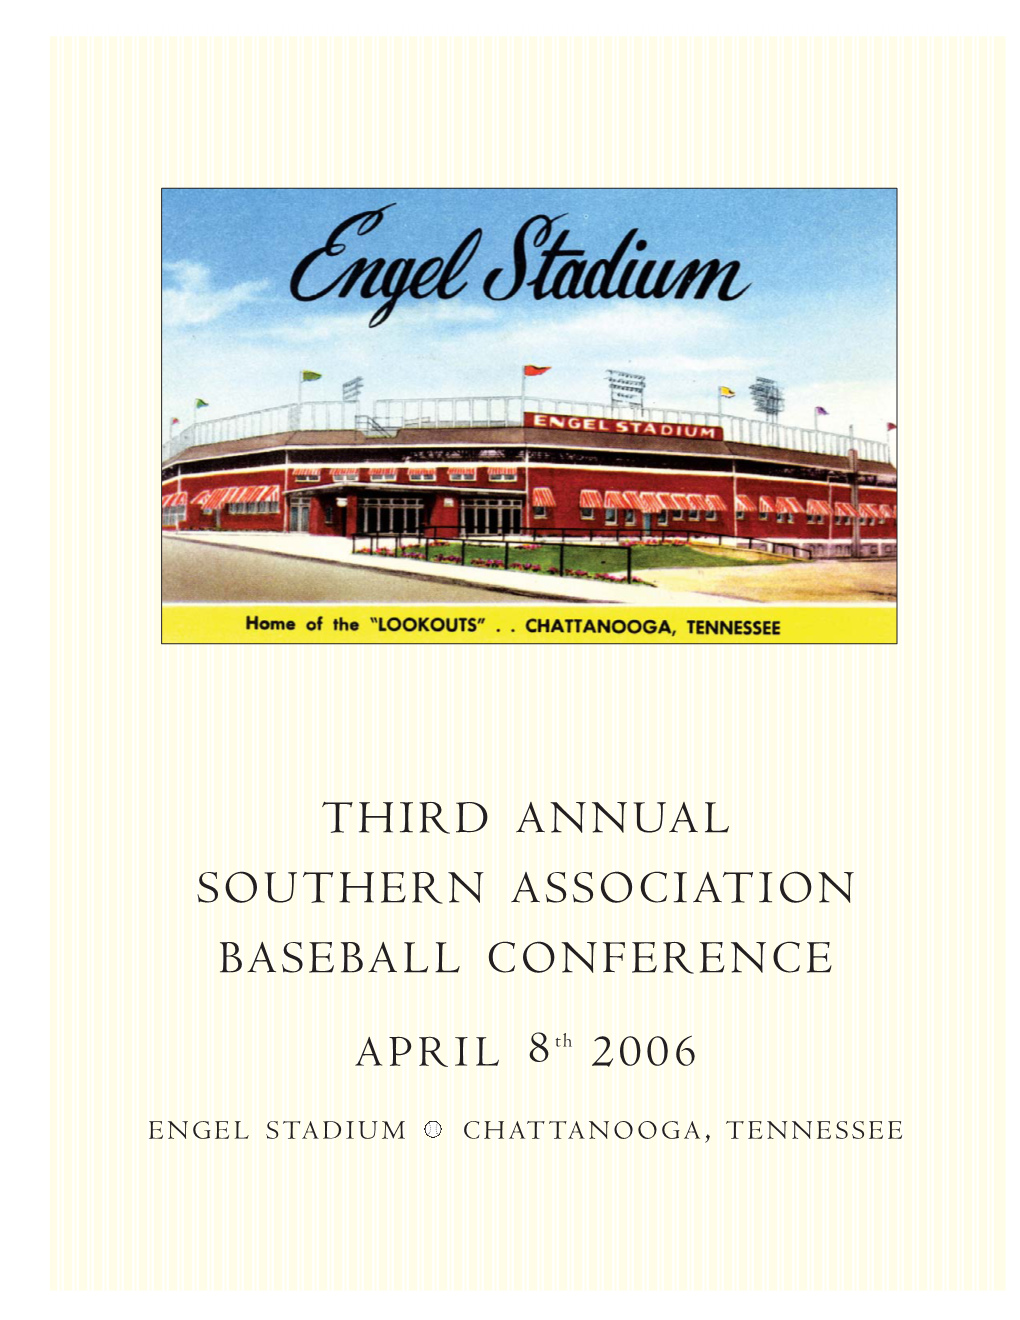 Third Annual Southern Association Baseball Conference